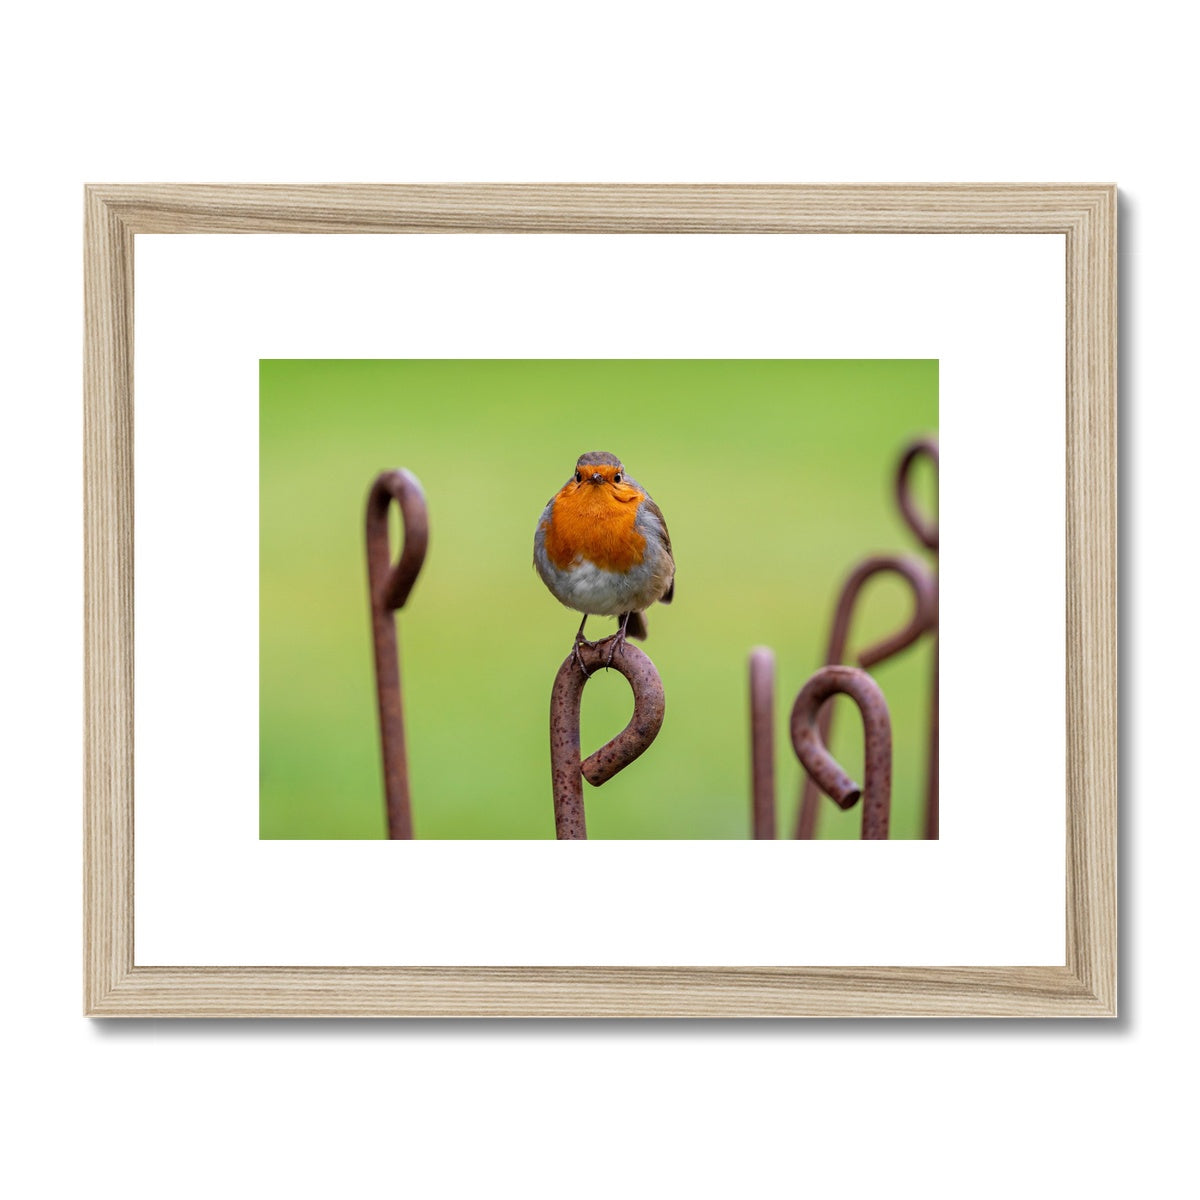 Robin sitting on a rusty metal stake in winter Framed & Mounted Print